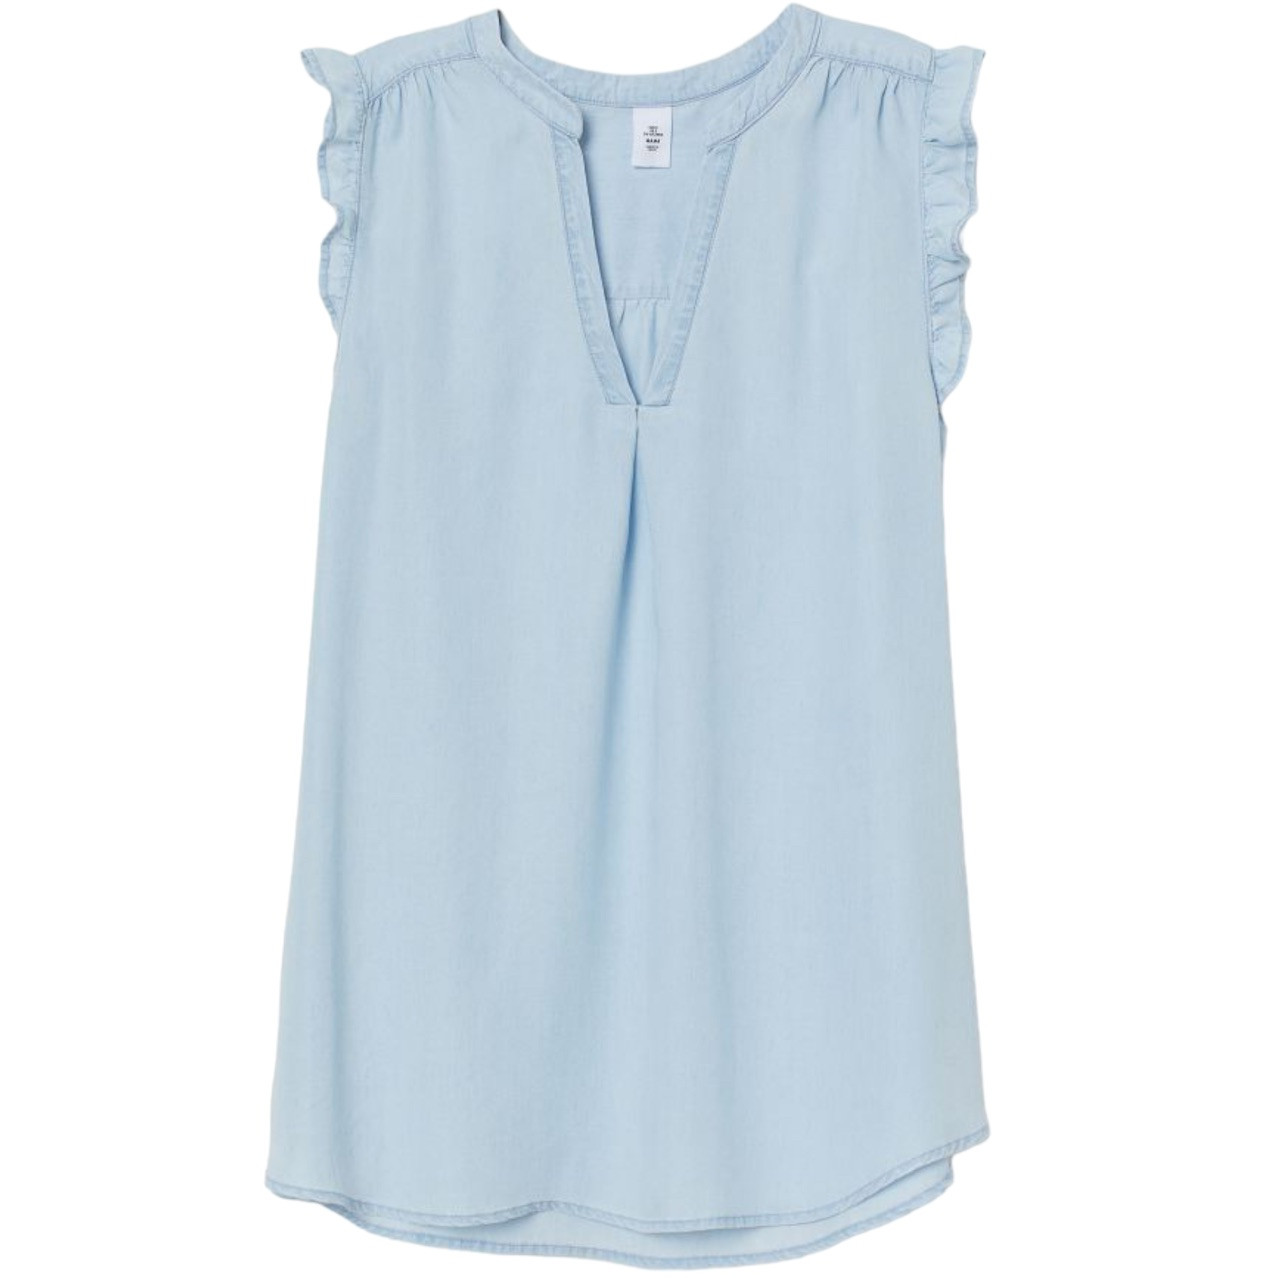 H&M Mama Lyocell Short Butterfly Sleeves Maternity Top Denim Blue